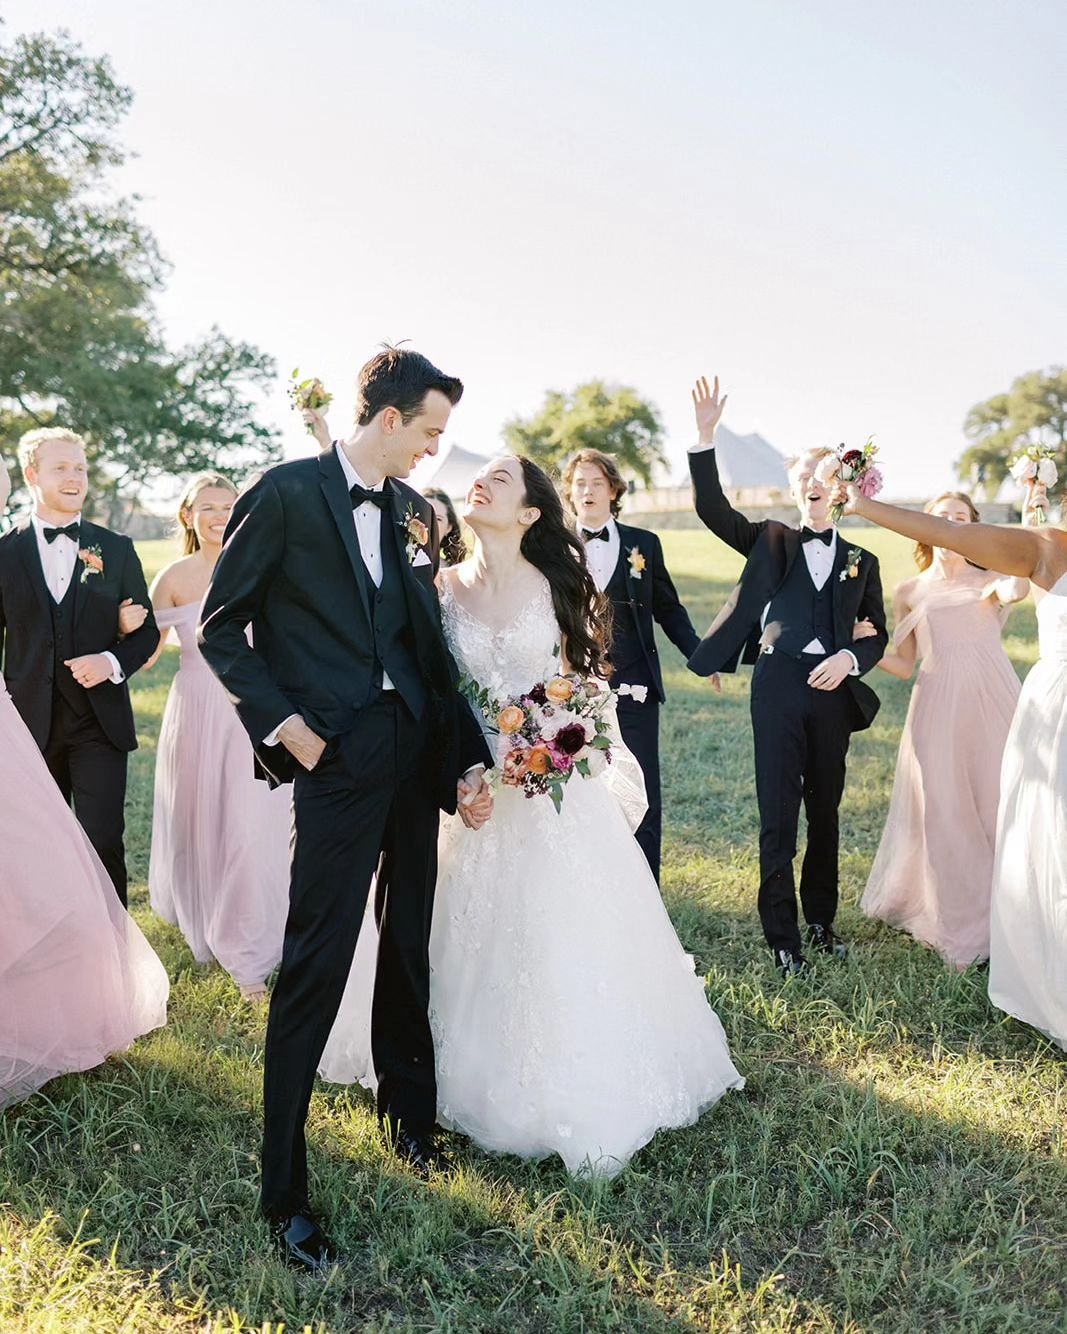 Happy 1 yr Anniversary Courtney + Ben! 💕

Reliving C + B's beautiful day has me lost in the charm of the Texas Hill Country, where English countryside vibes met rustic elegance. Cheers to creating more memories that last a lifetime!

@windemerefarmw